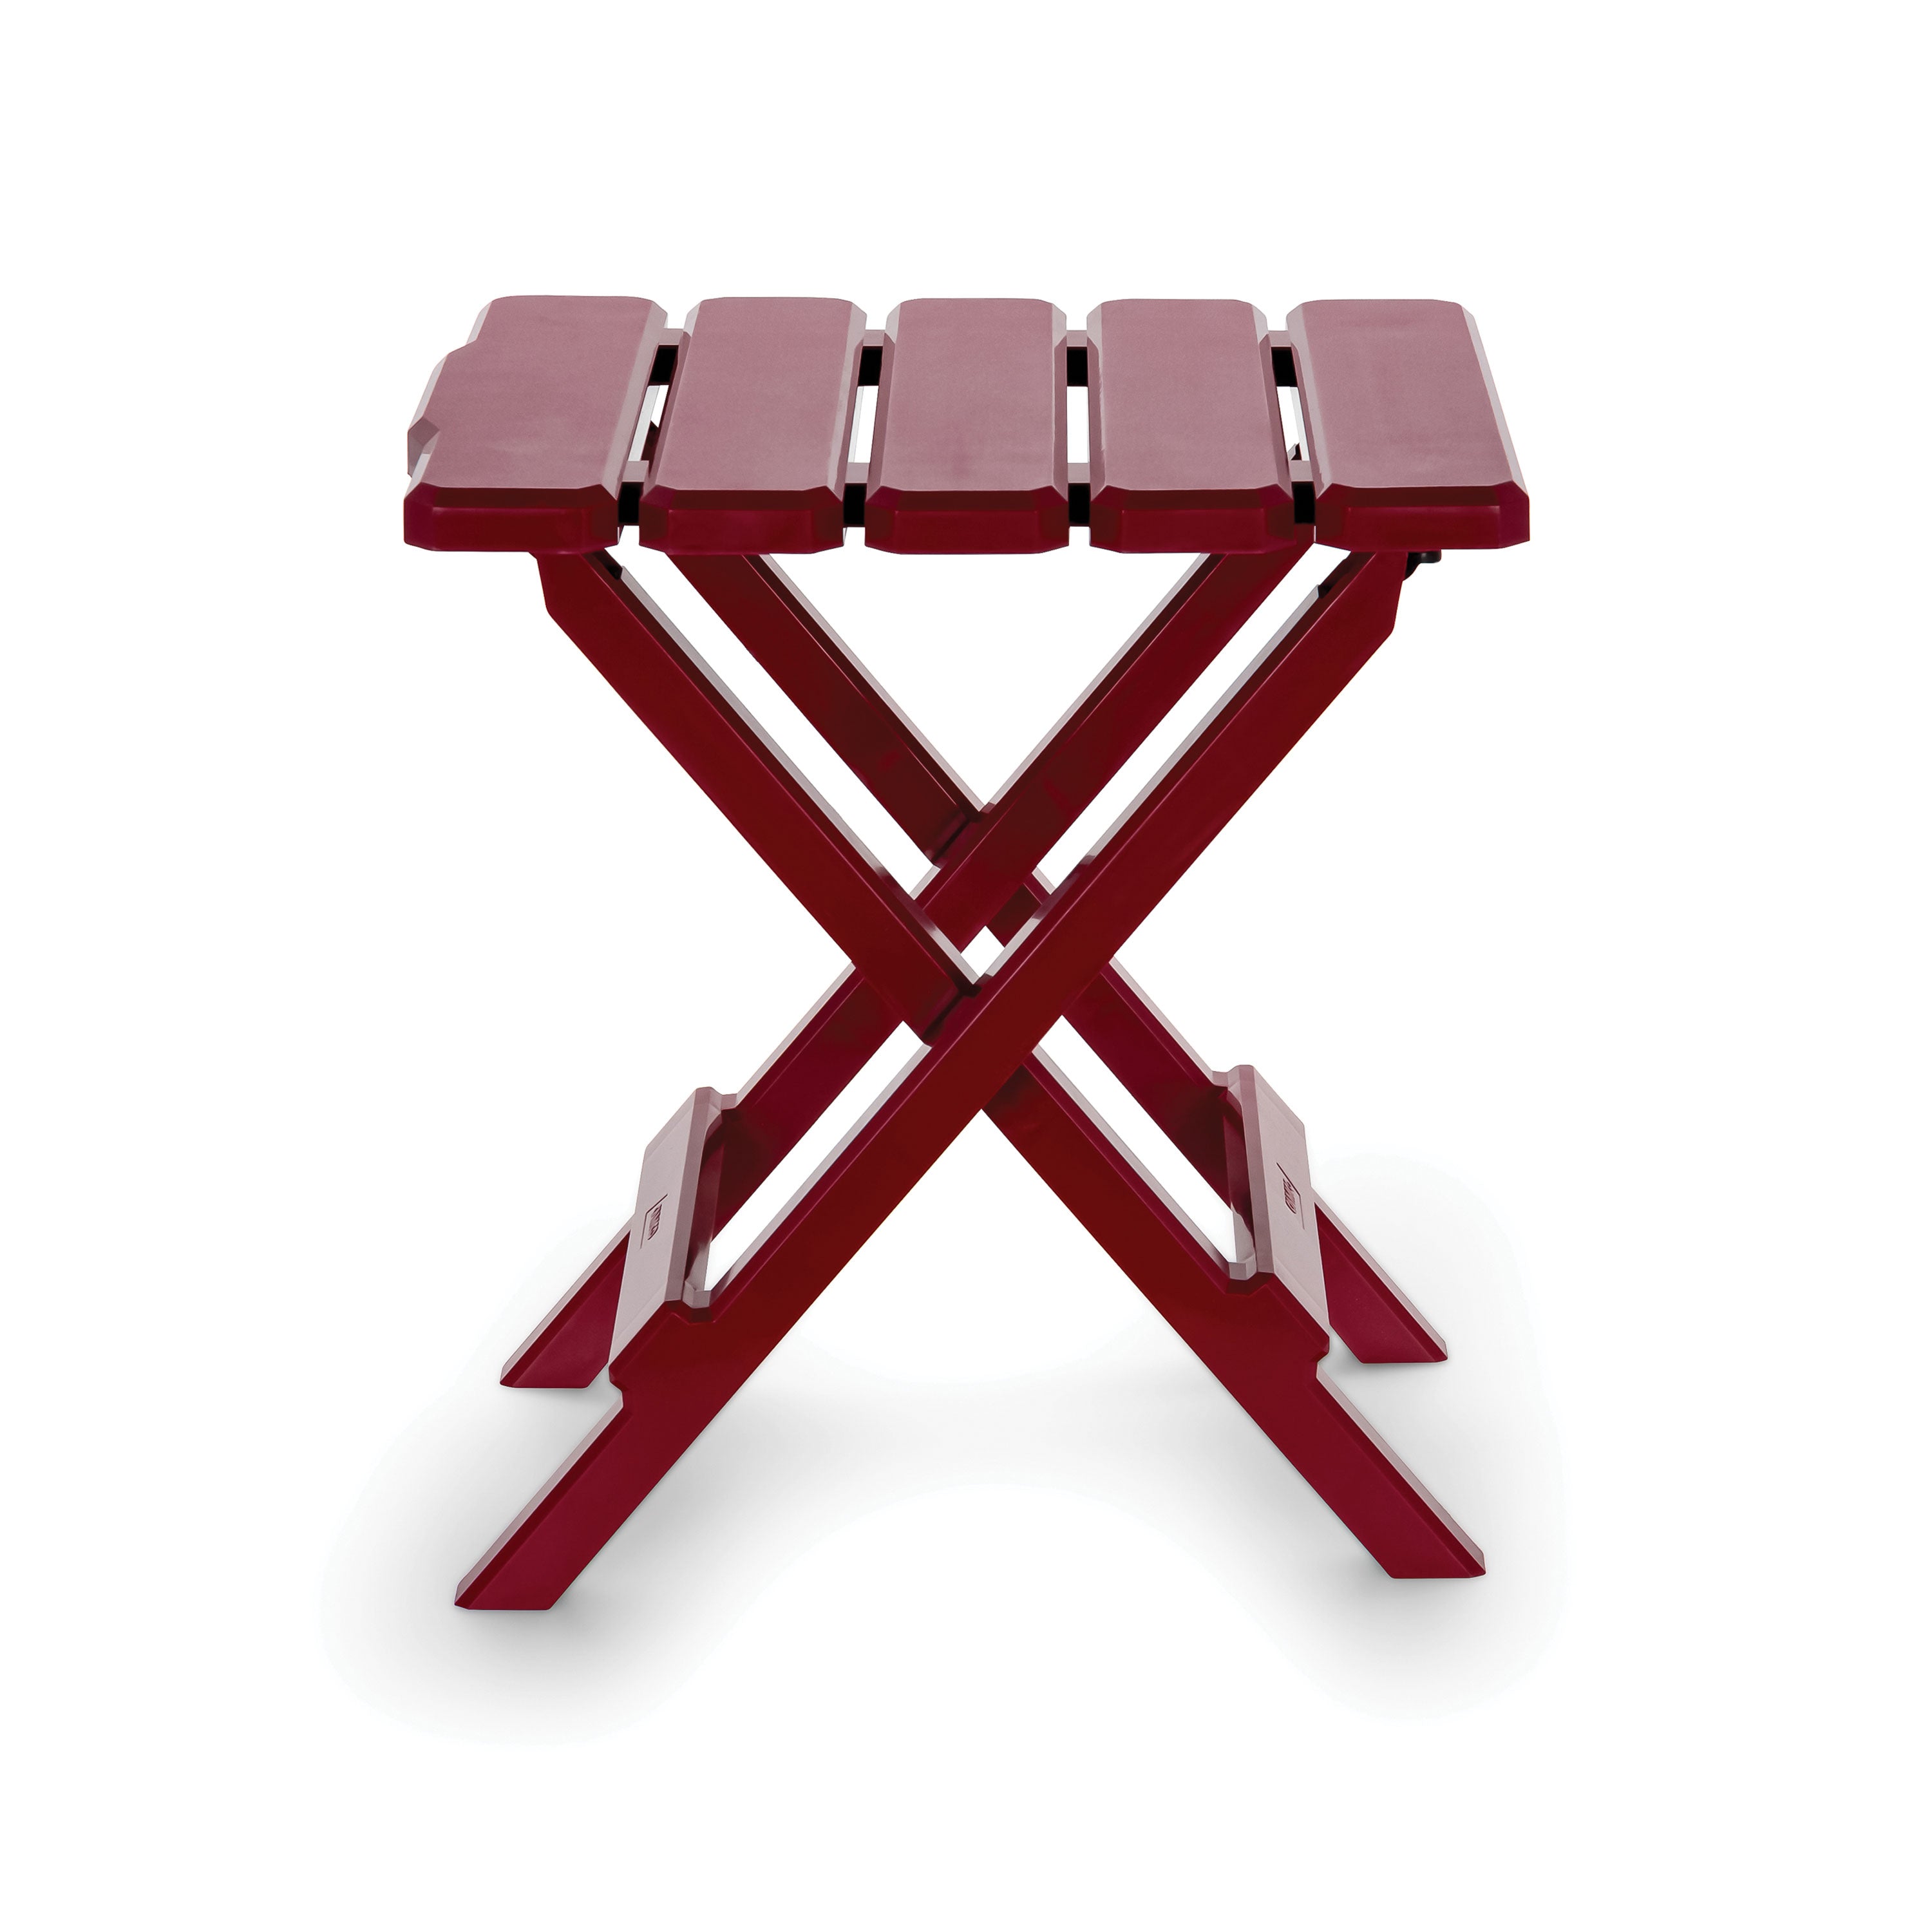 Camco 51684 Adirondack Folding Table Small - Red